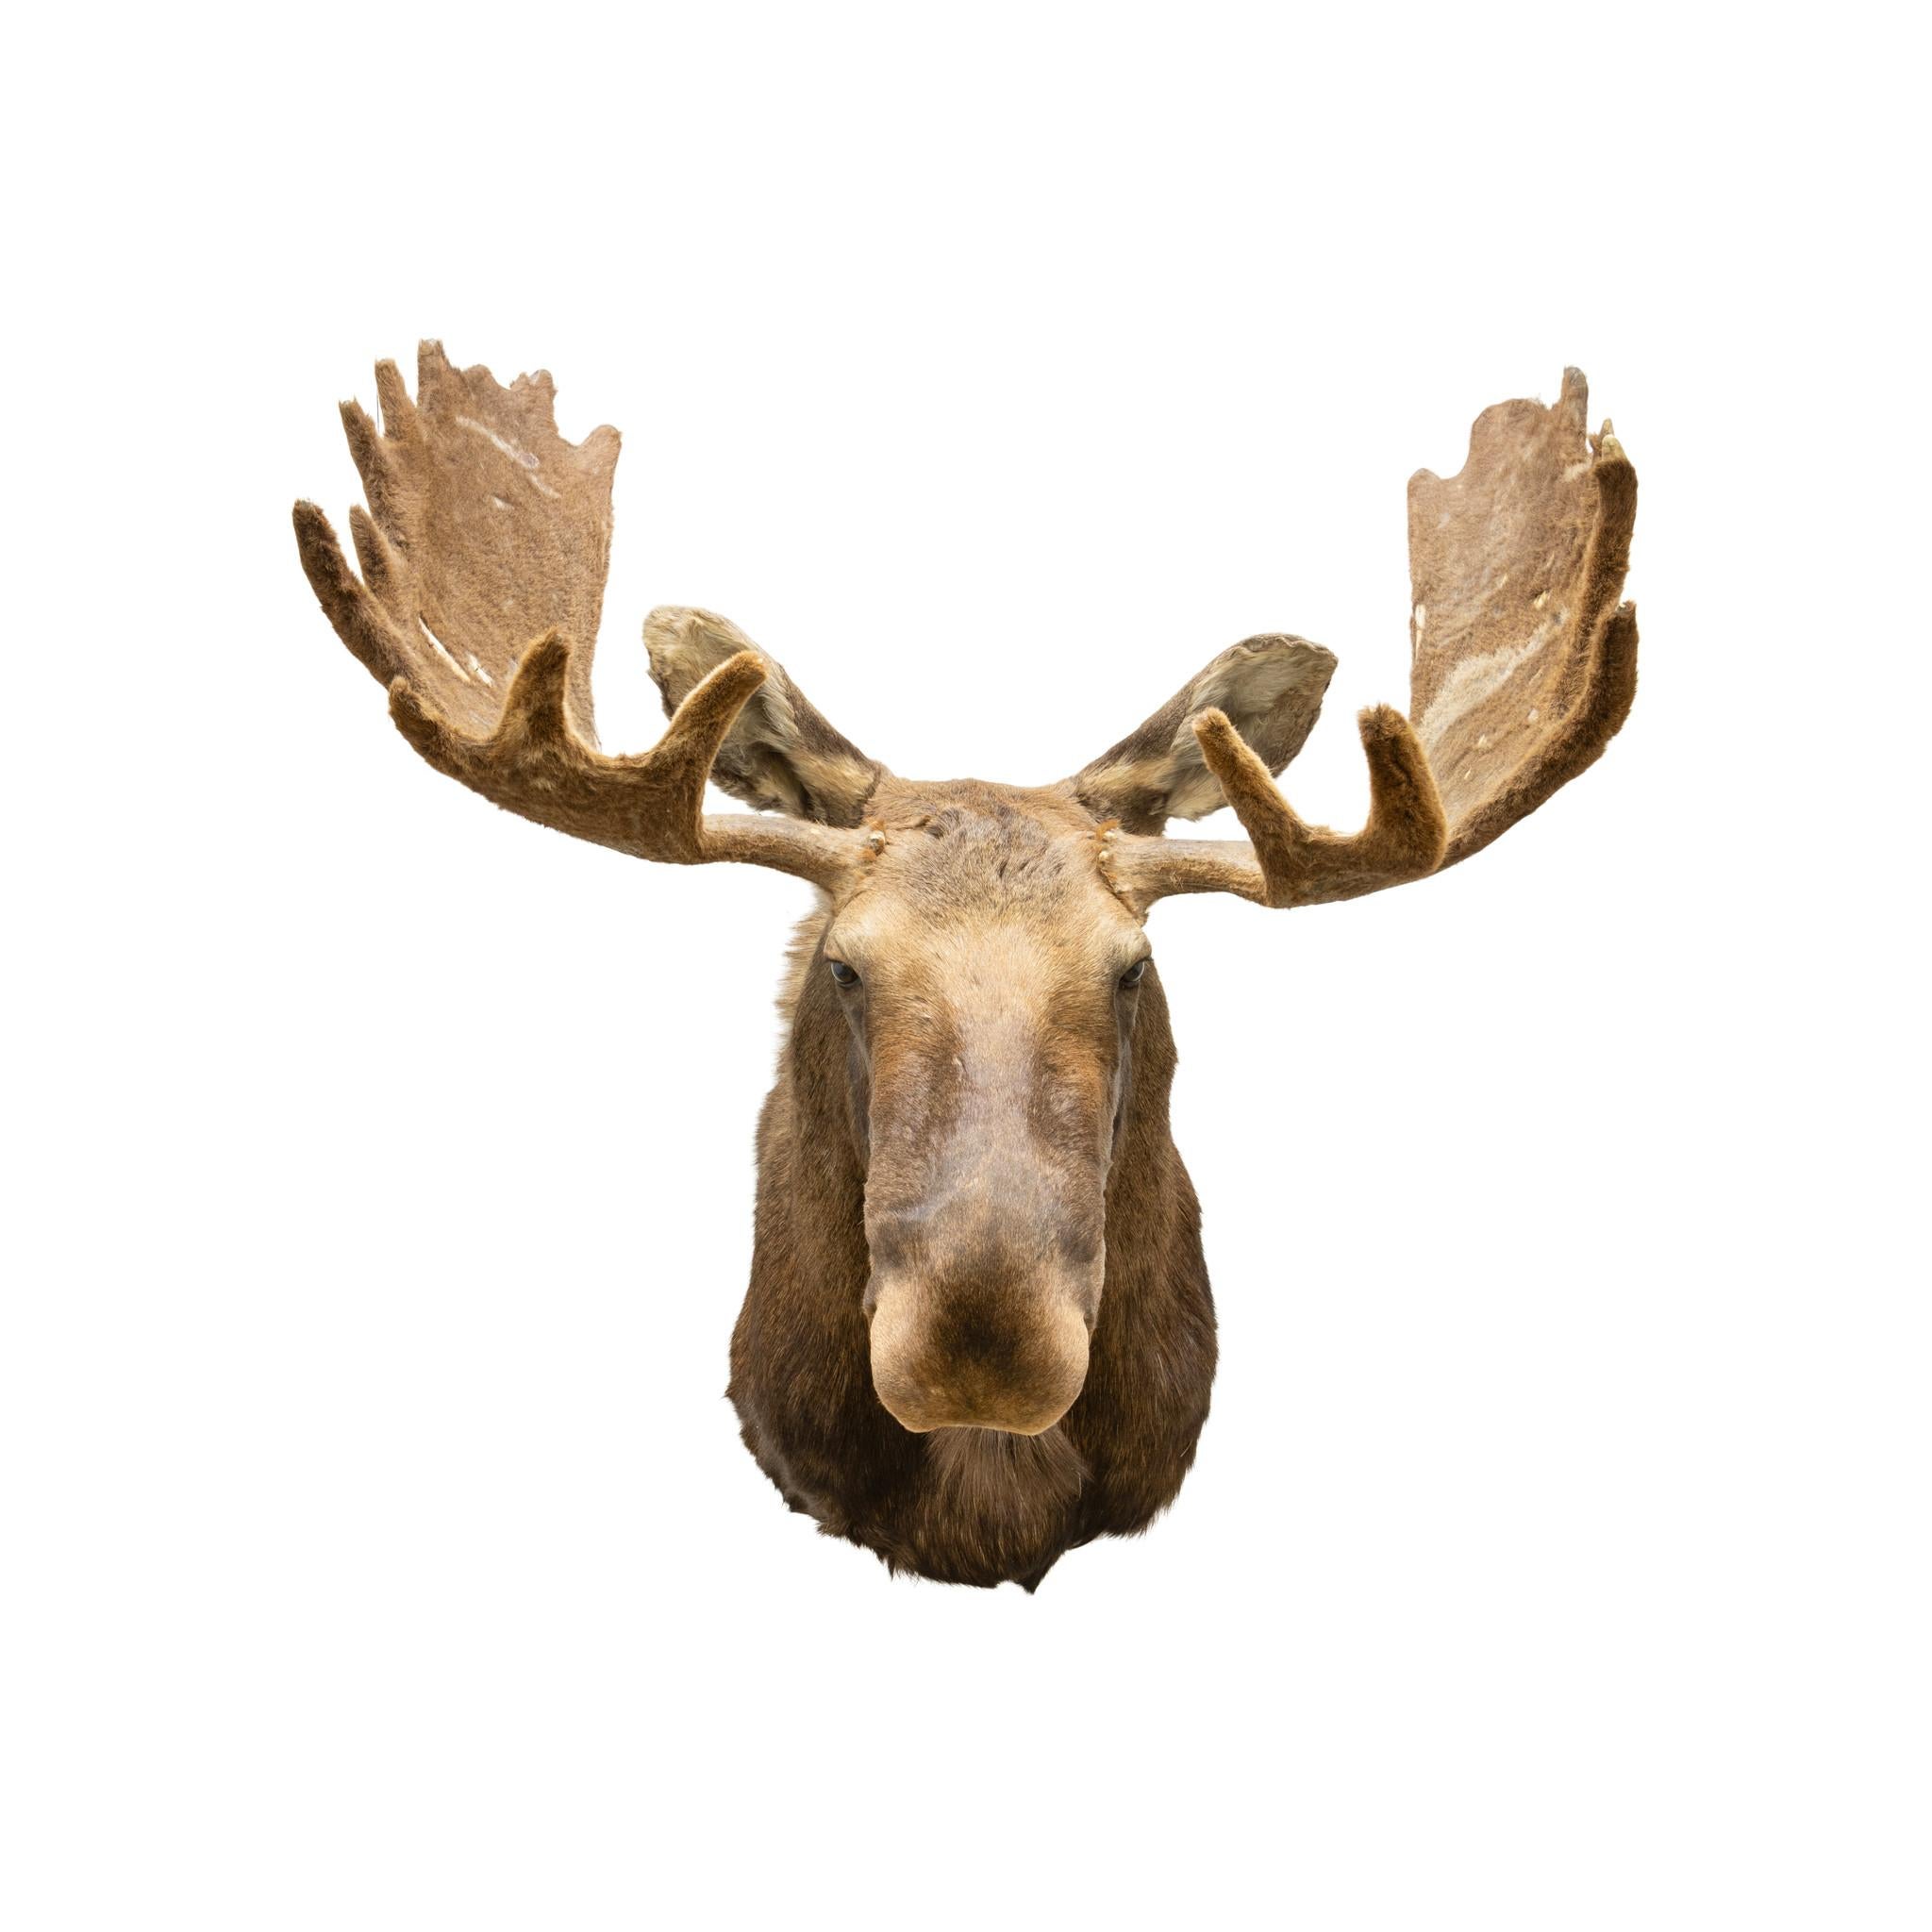 Large vintage yukon moose mount. Antlers still in velvet. Nice fur and nice shape to face. Great accent piece for a rustic home or cabin. Circa 1900. Size: 42”W x 4’H protrudes 43”

Family Owned & Operated
Cisco’s Gallery deals in the rare,